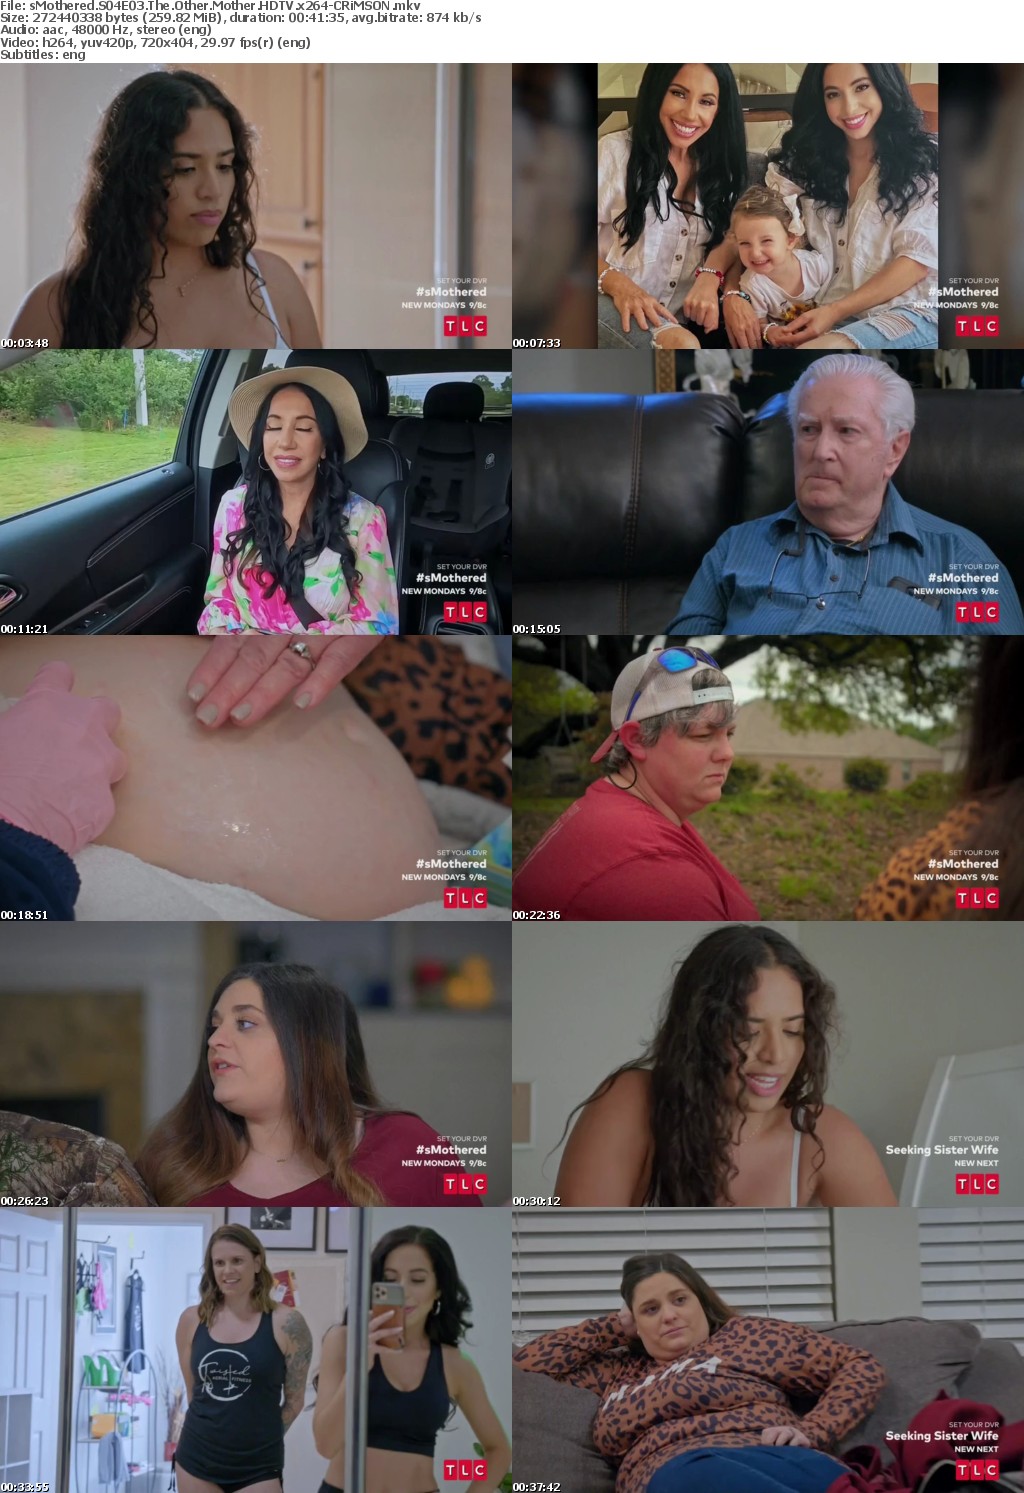 sMothered S04E03 The Other Mother HDTV x264-CRiMSON